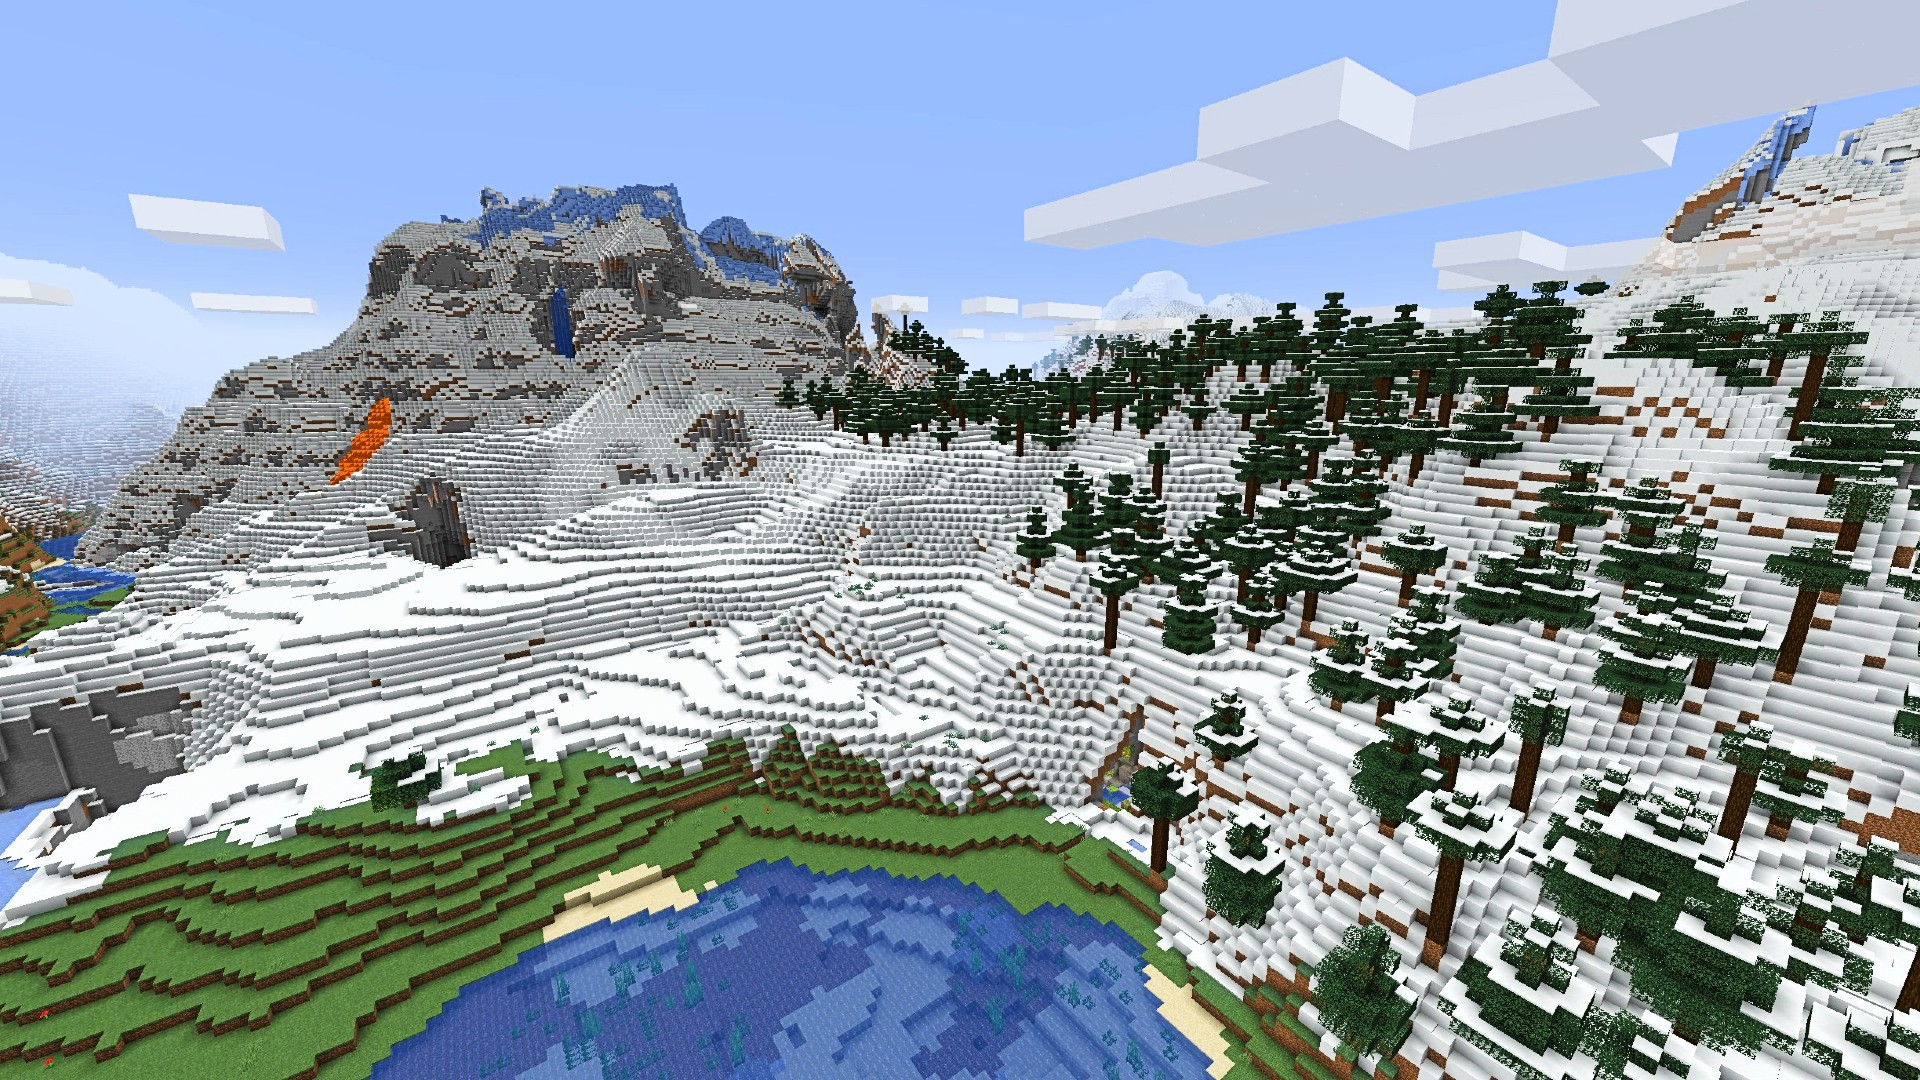 Minecraft players are already discovering incredible landscapes in the 1.18 snapshot